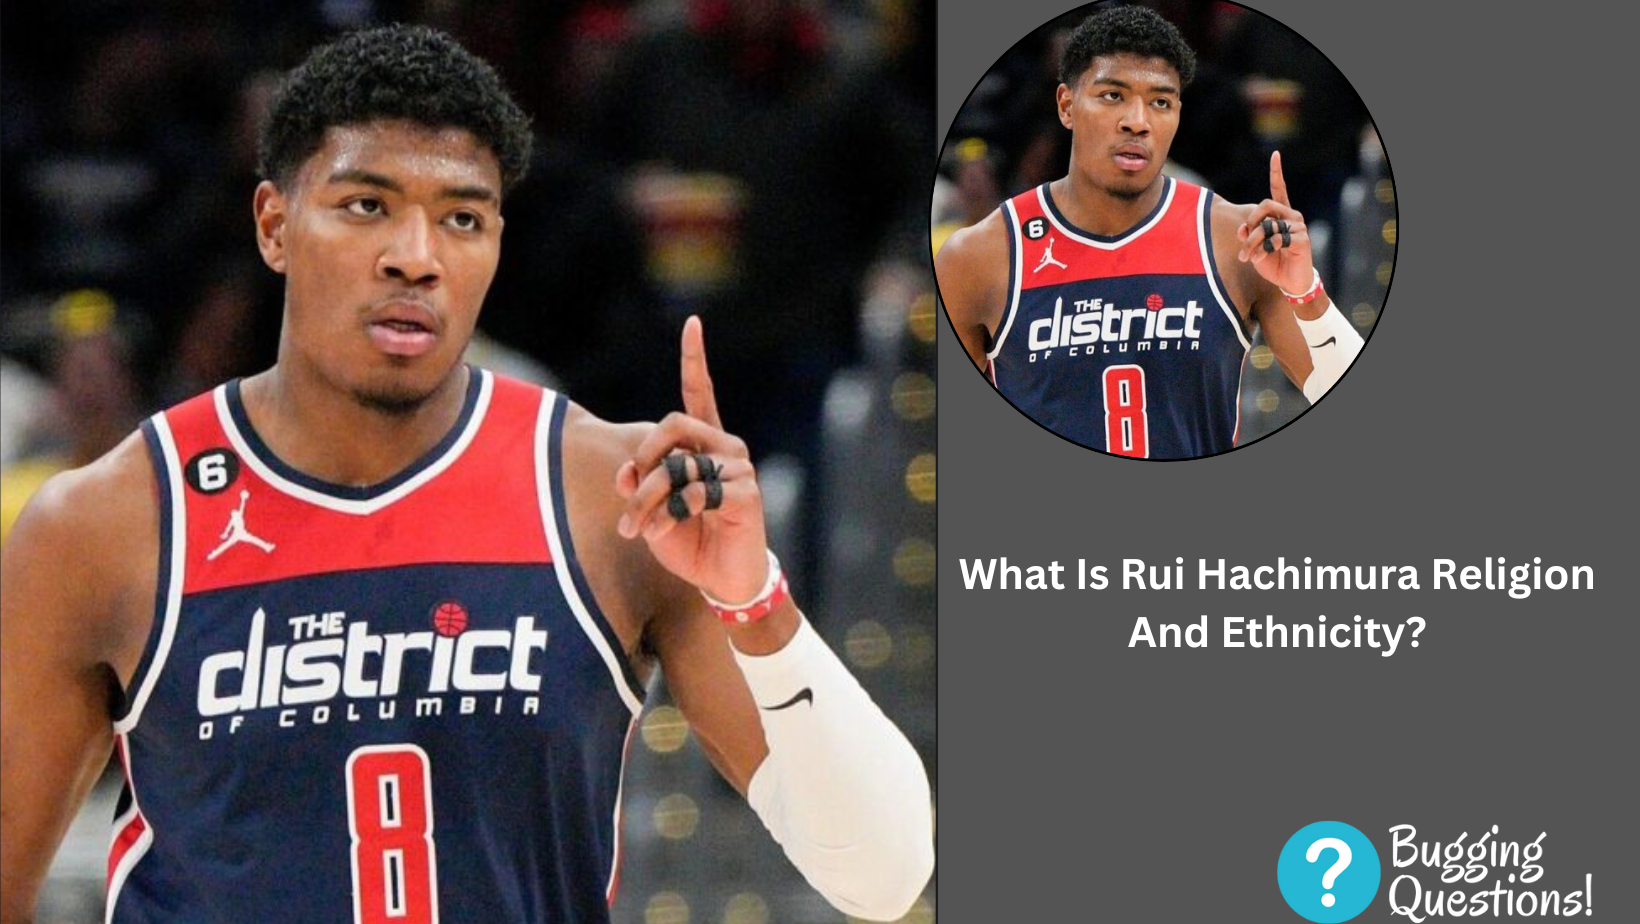 What Is Rui Hachimura Religion And Ethnicity?